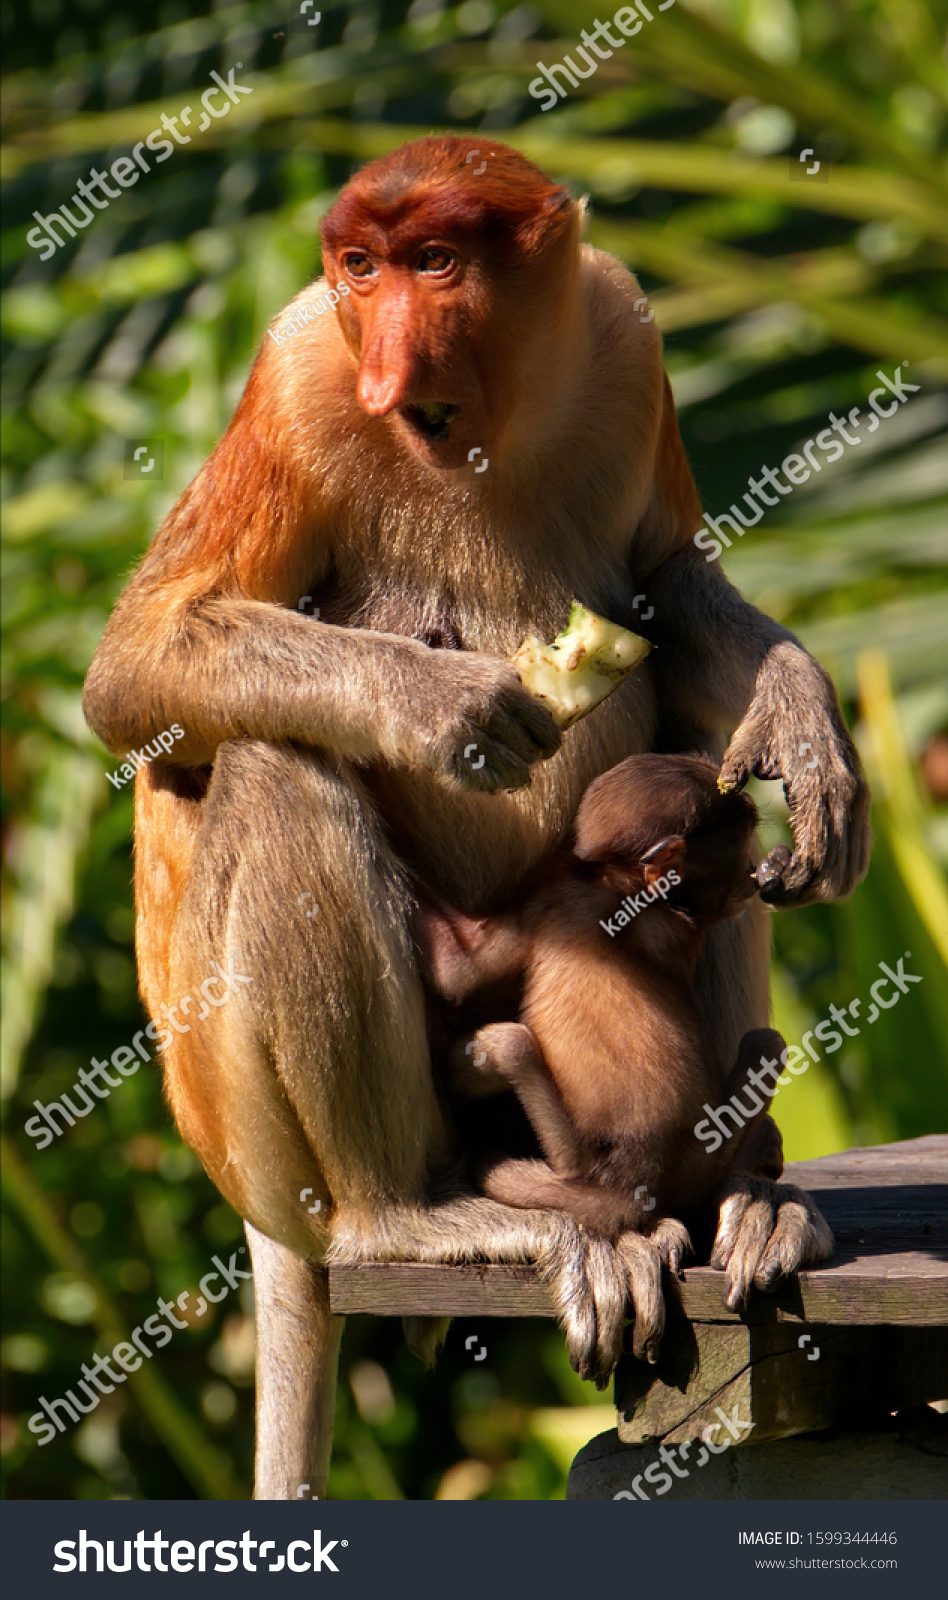 Malaysia. The long-nosed monkey or kahau — a species of primates from the subfamily of thin-bodied monkeys in the family of monkeys. Distributed exclusively on the island of Borneo #1599344446